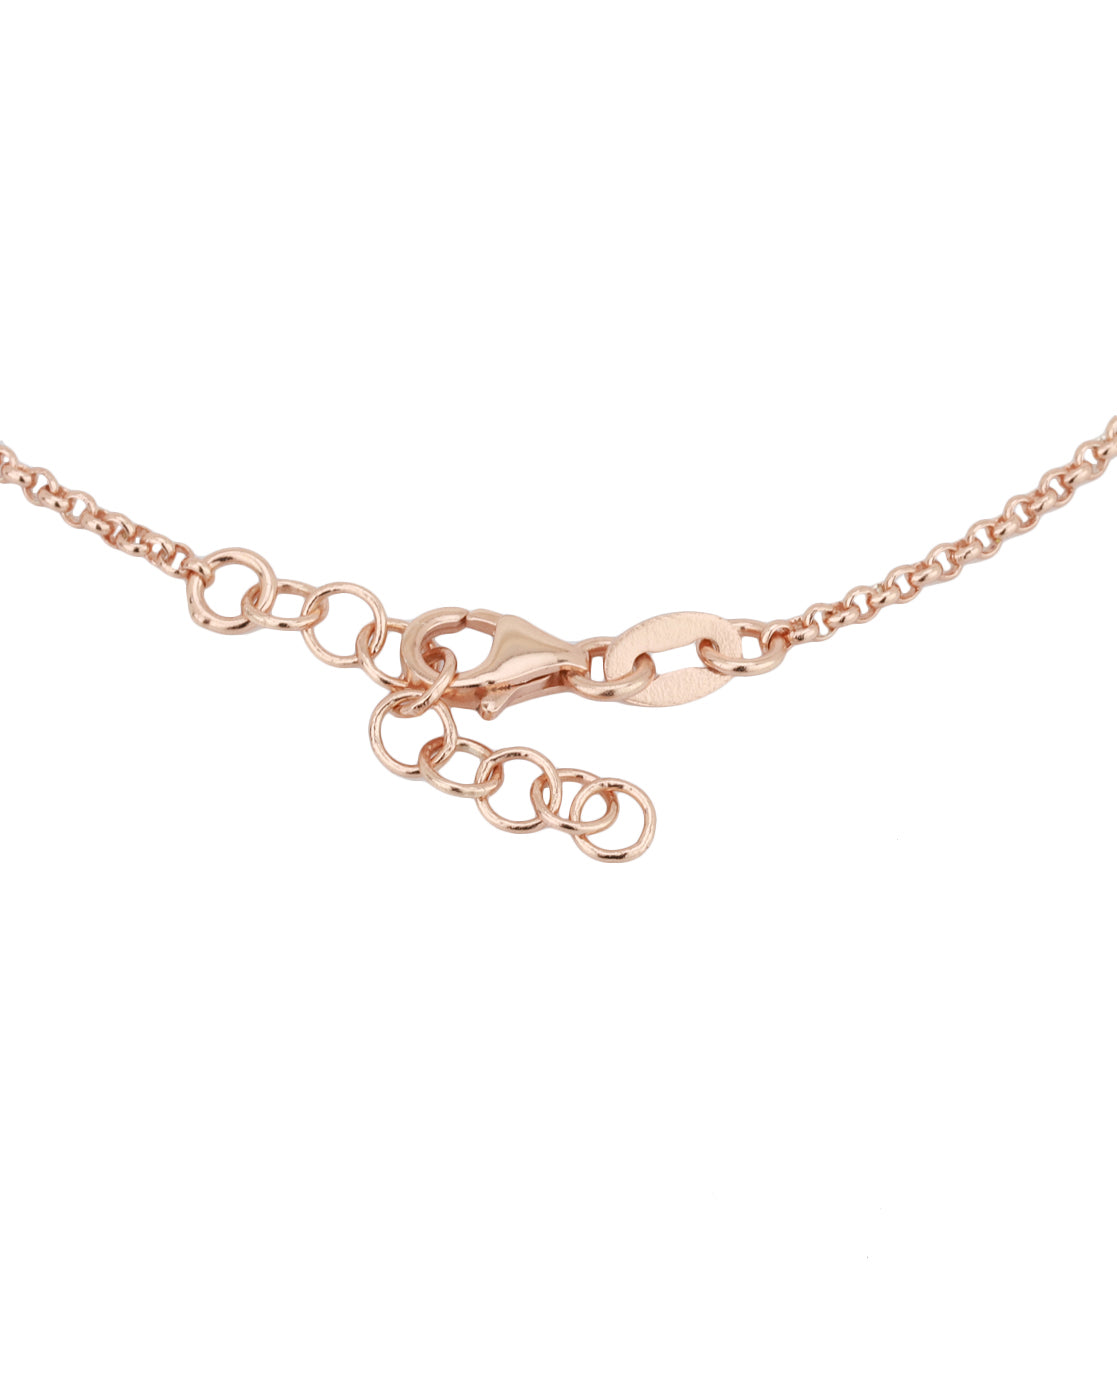 Carlton London Rose Gold Plated With Heart Charm Bracelet